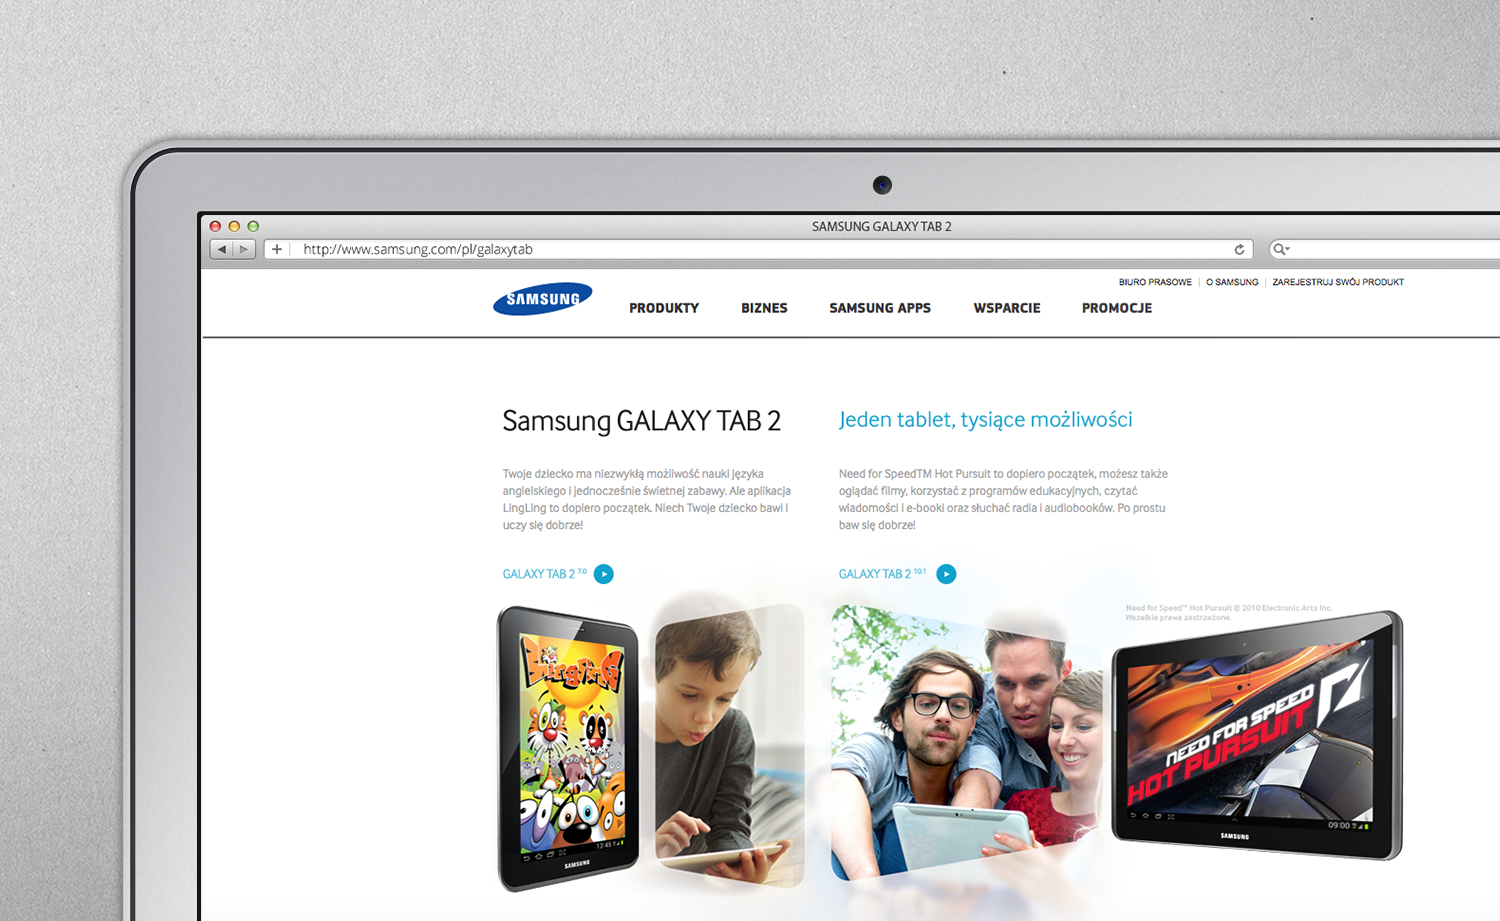 Another project for Samsung – Galaxy Tab